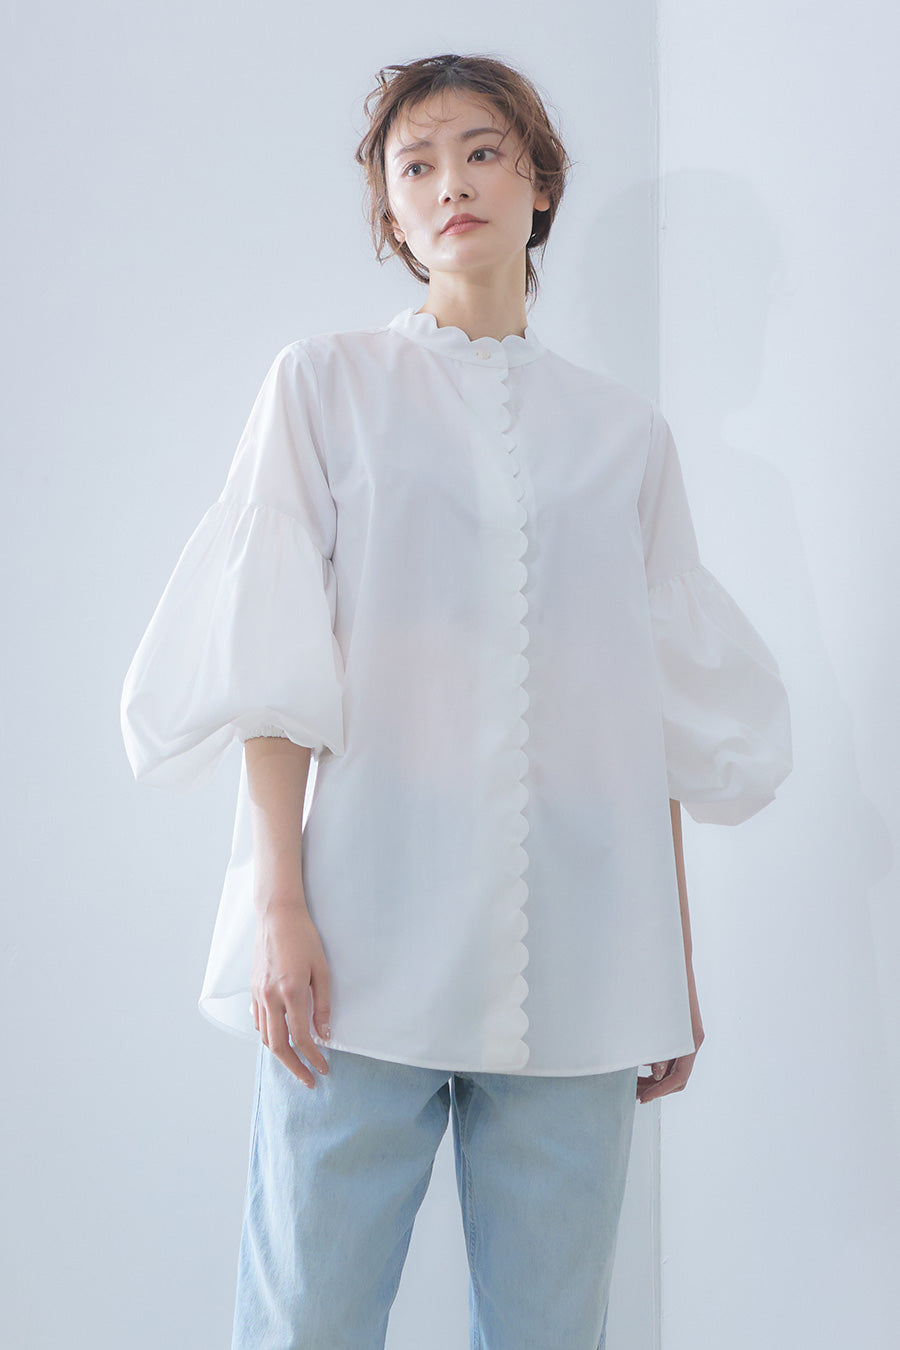 tiny scallop blouse / Off